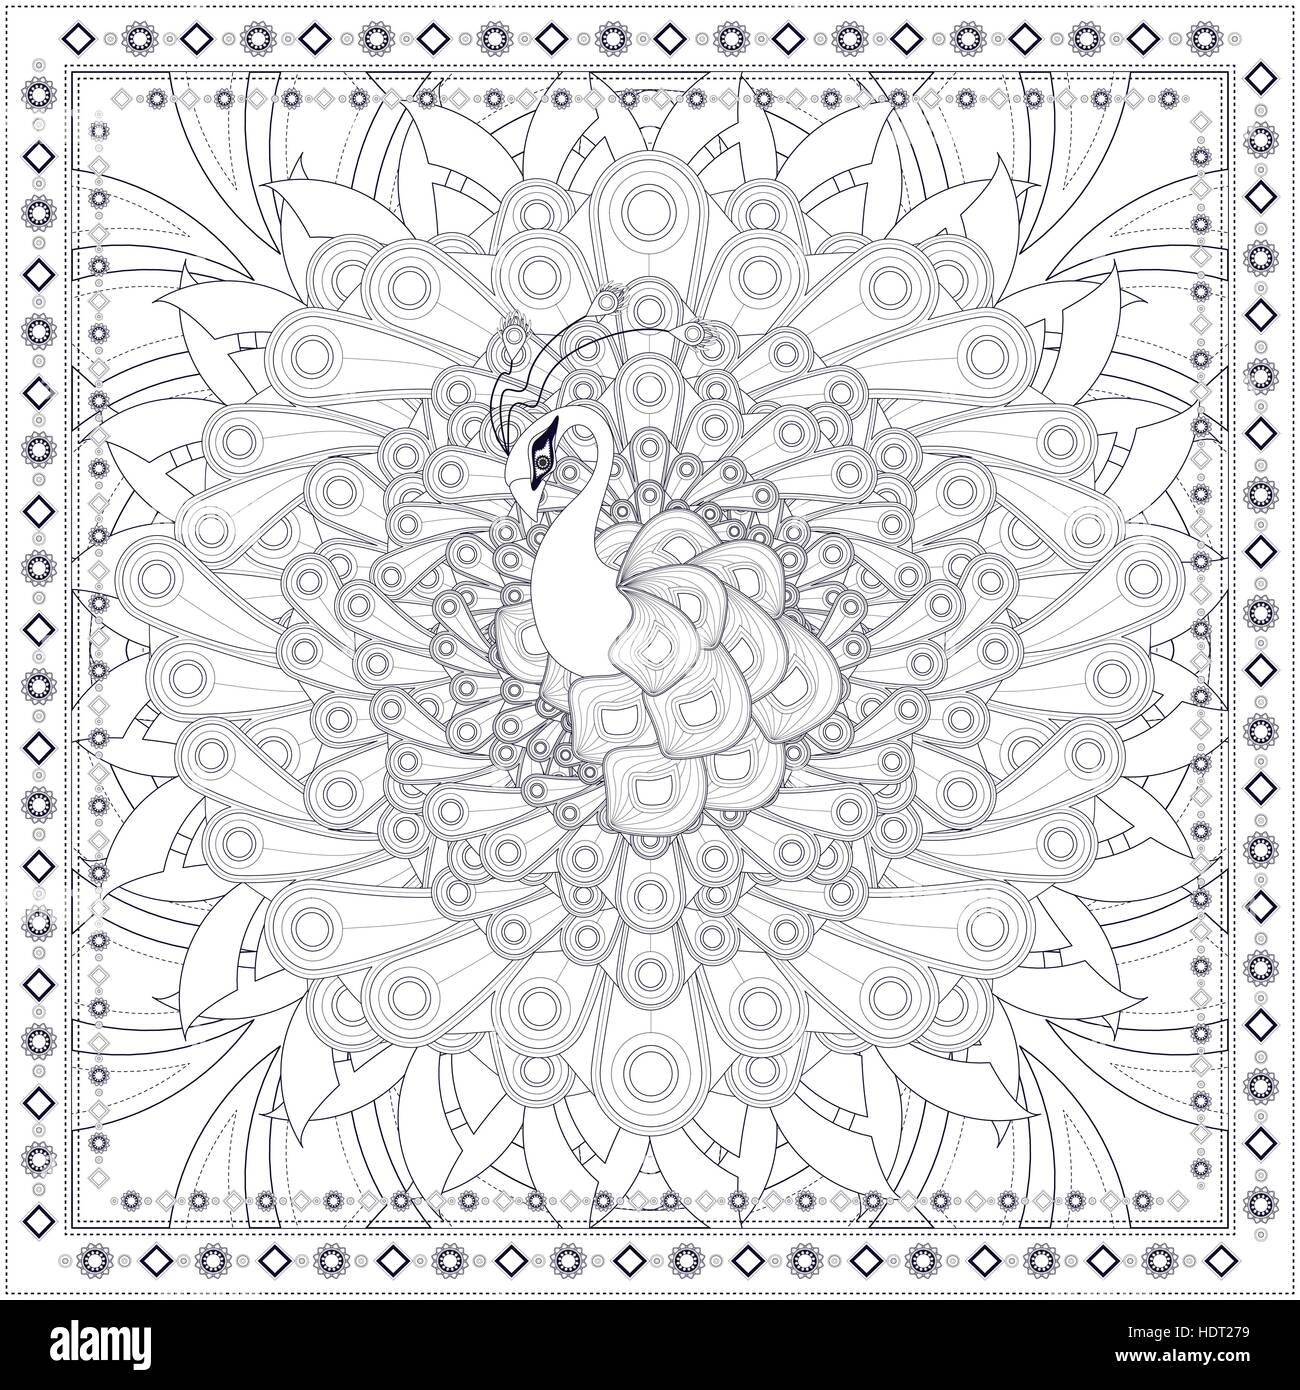 gorgeous peacock coloring page design in ethnic style Stock Vector